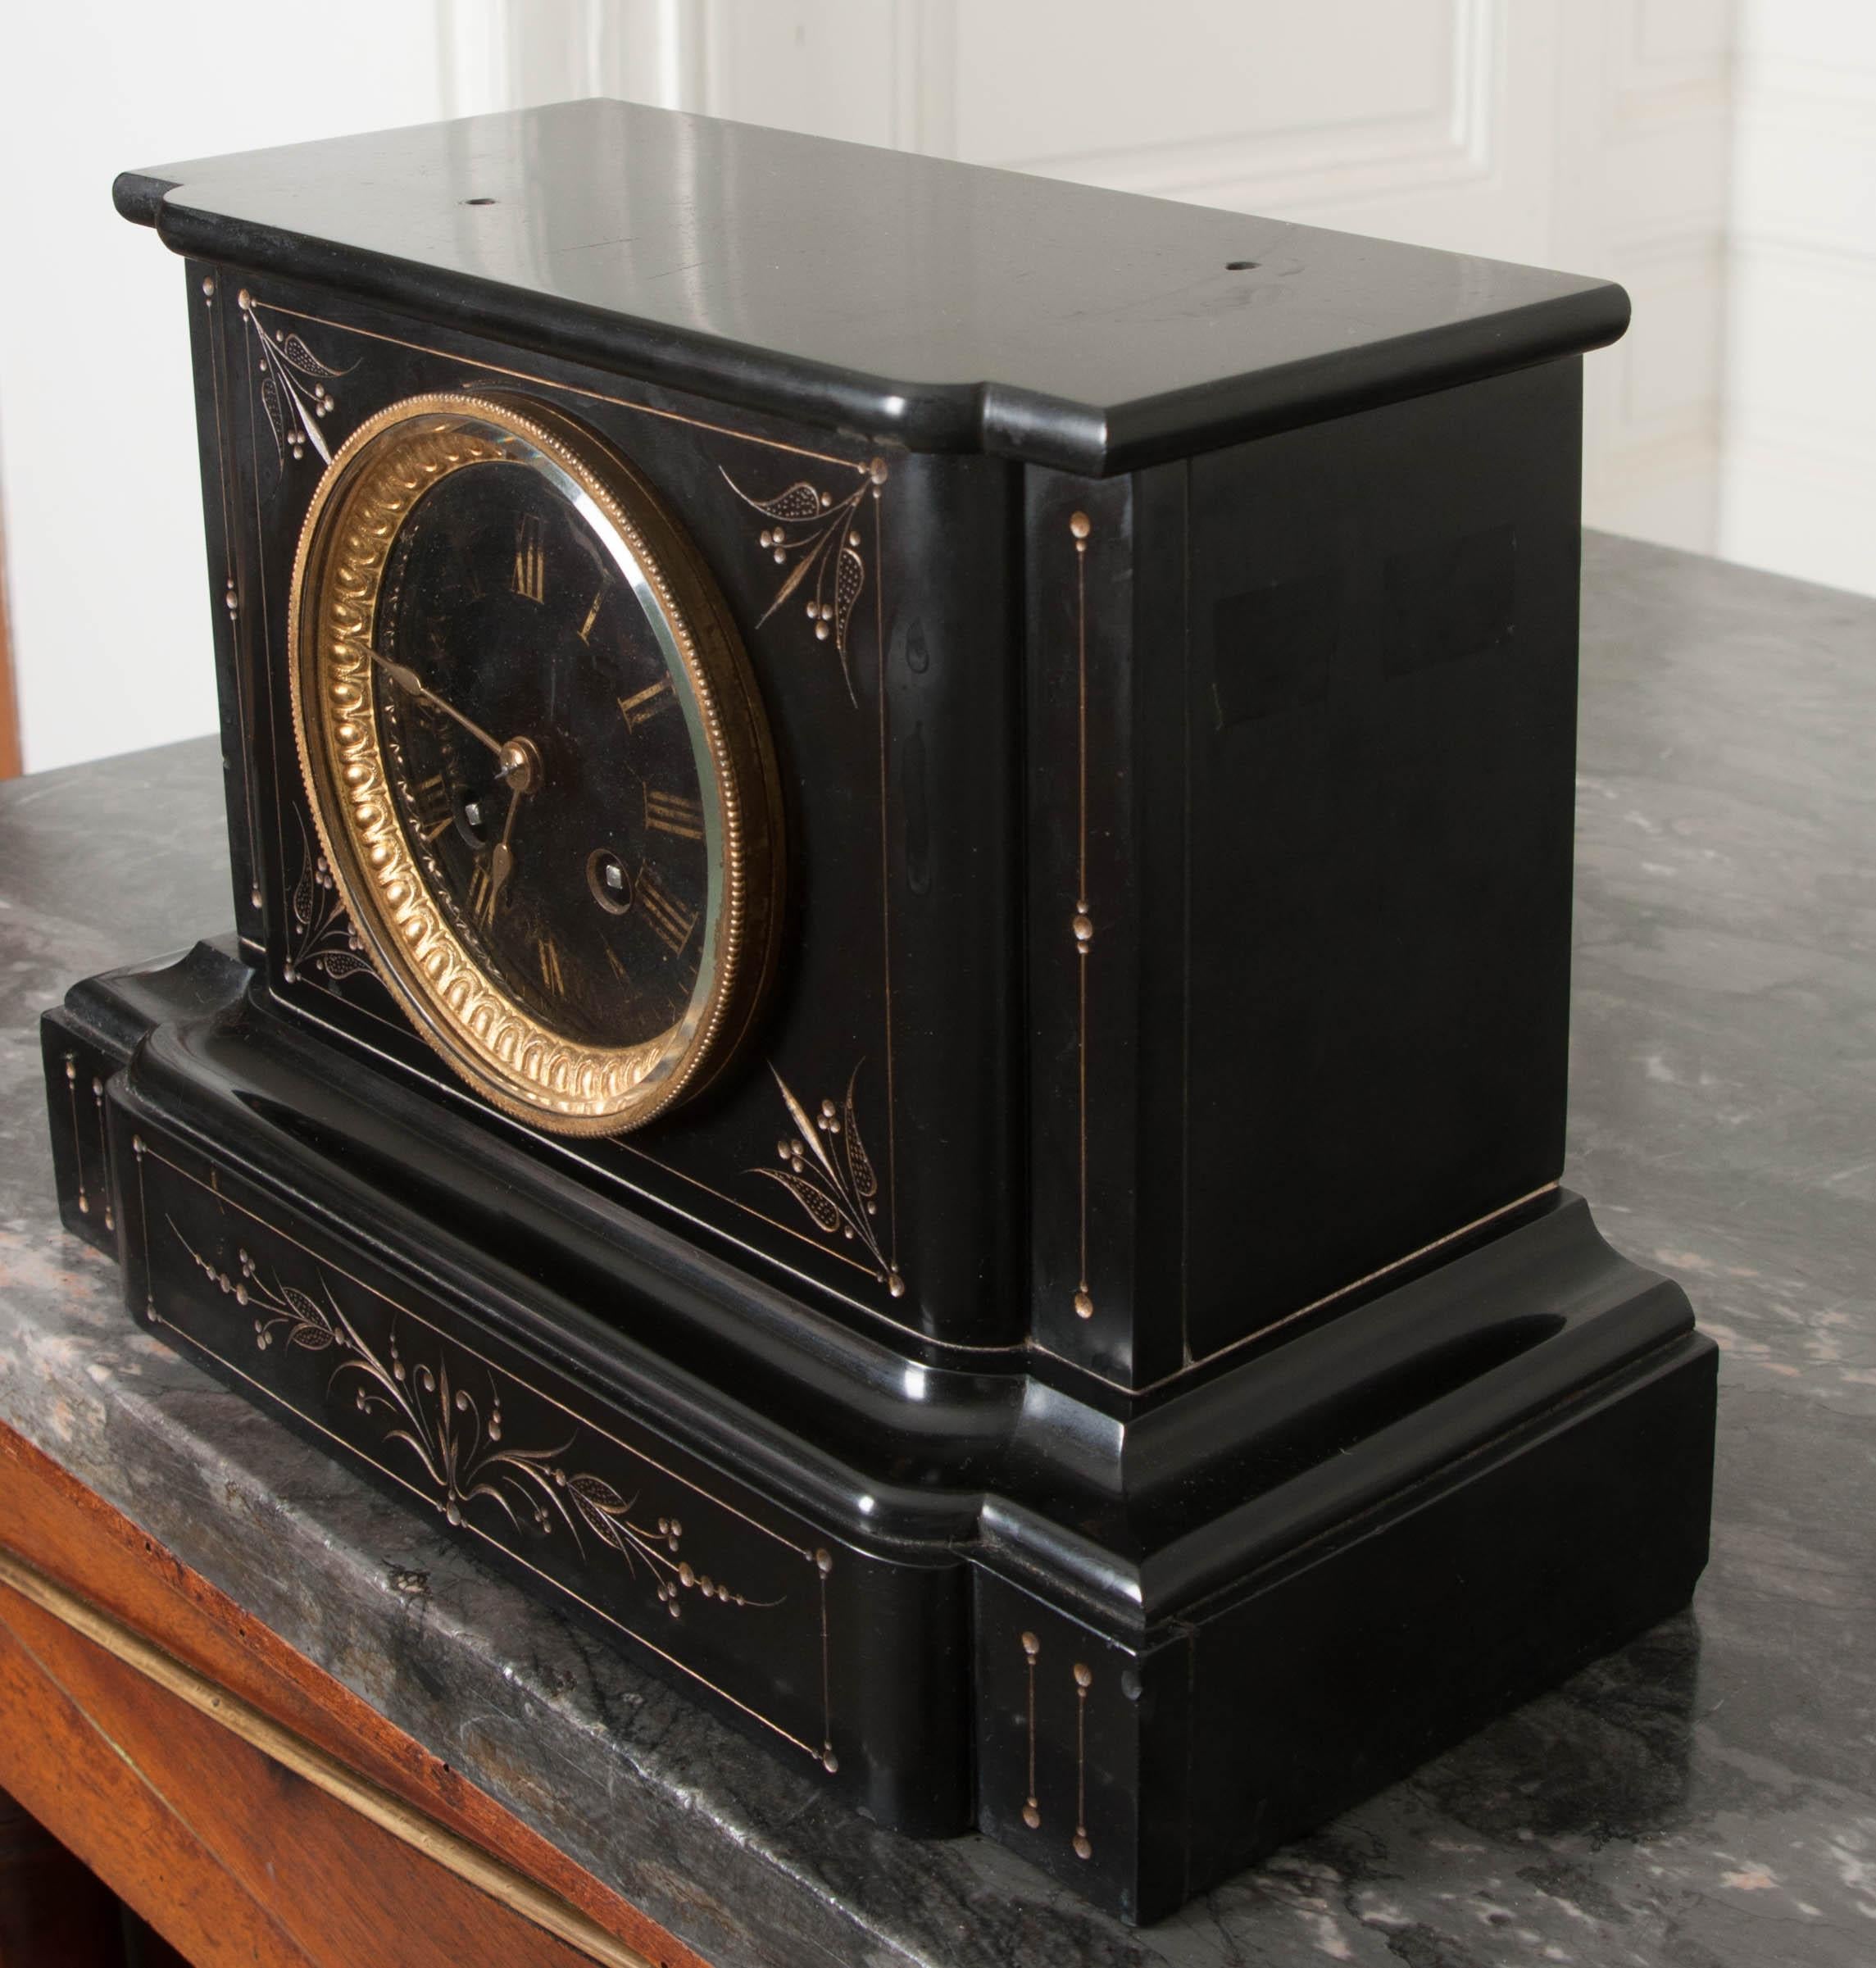 This lovely French, Paris Movement mantel clock, c. 1880, with incised and gilt decoration, is of square section on a stepped plinth base and features an enamel dial with hand-painted Roman numerals and gilt-brass bezel with the original convex